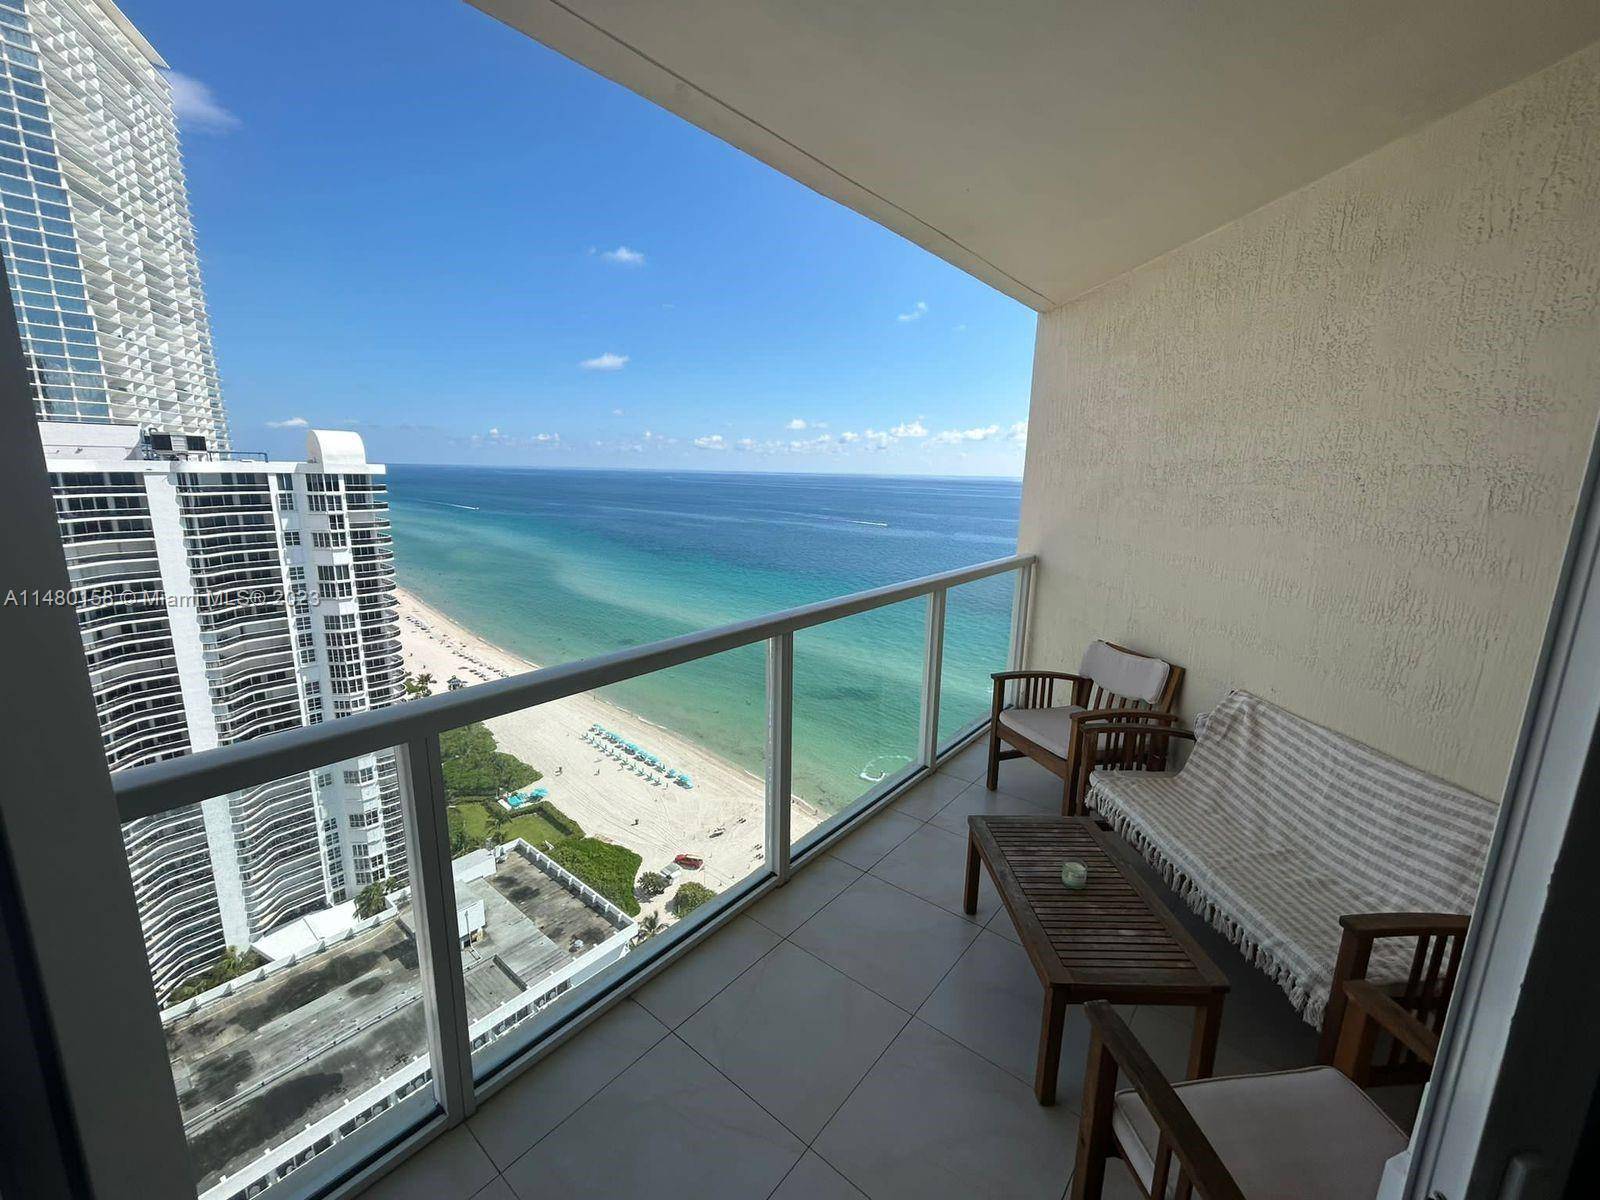 Beautiful 2 bdr den with ocean view, fully finished.